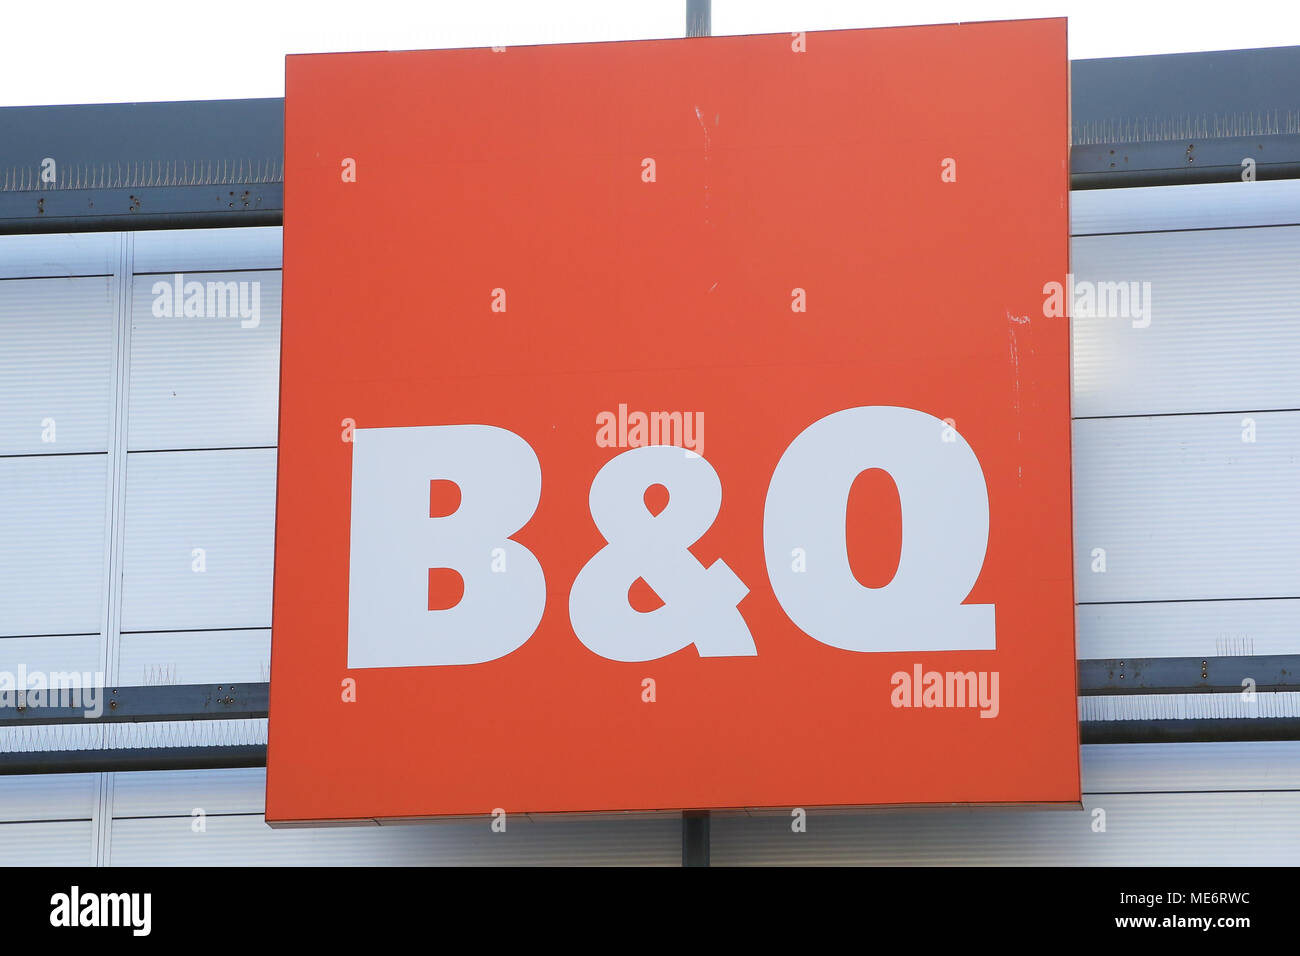 General view of B&Q in Tottenham Hale shopping centre.   B&Q’s owner Kingfisher has reported a drop of more than 10 per cent in their annual profits and warns of an 'uncertain' UK outlook after a recent hit to sales. B&Q is in the middle of an overhaul, which has seen it shut 65 shops and slash around 3,000 jobs in the UK and Ireland over the last two years.   Featuring: Atmosphere, View Where: London, United Kingdom When: 21 Mar 2018 Credit: Dinendra Haria/WENN Stock Photo